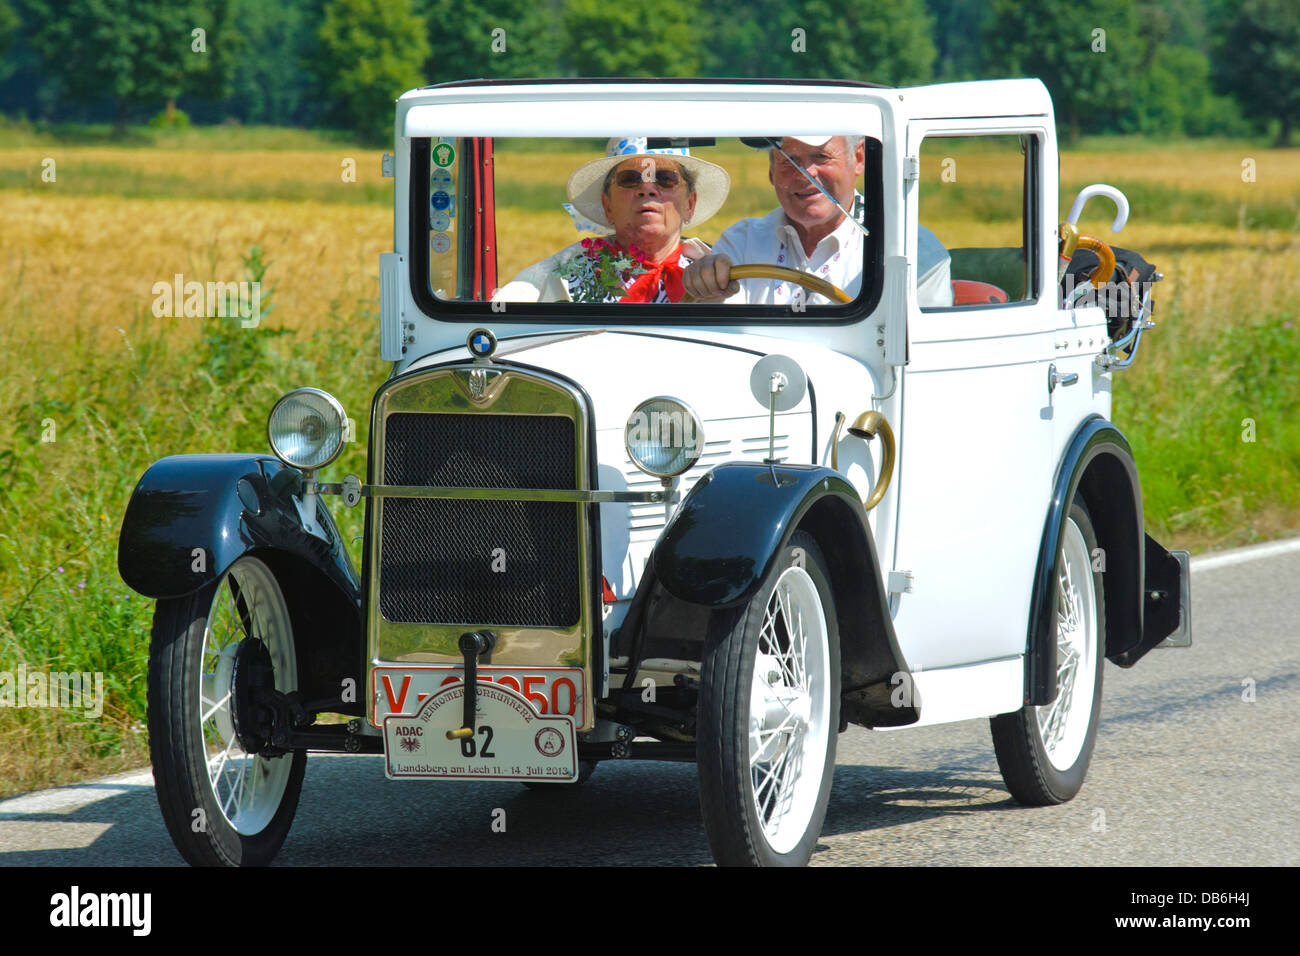 BMW Dixi Cabriolet, built at year 1929, photo taken on July 13, 2013 in Landsberg, Germany Stock Photo